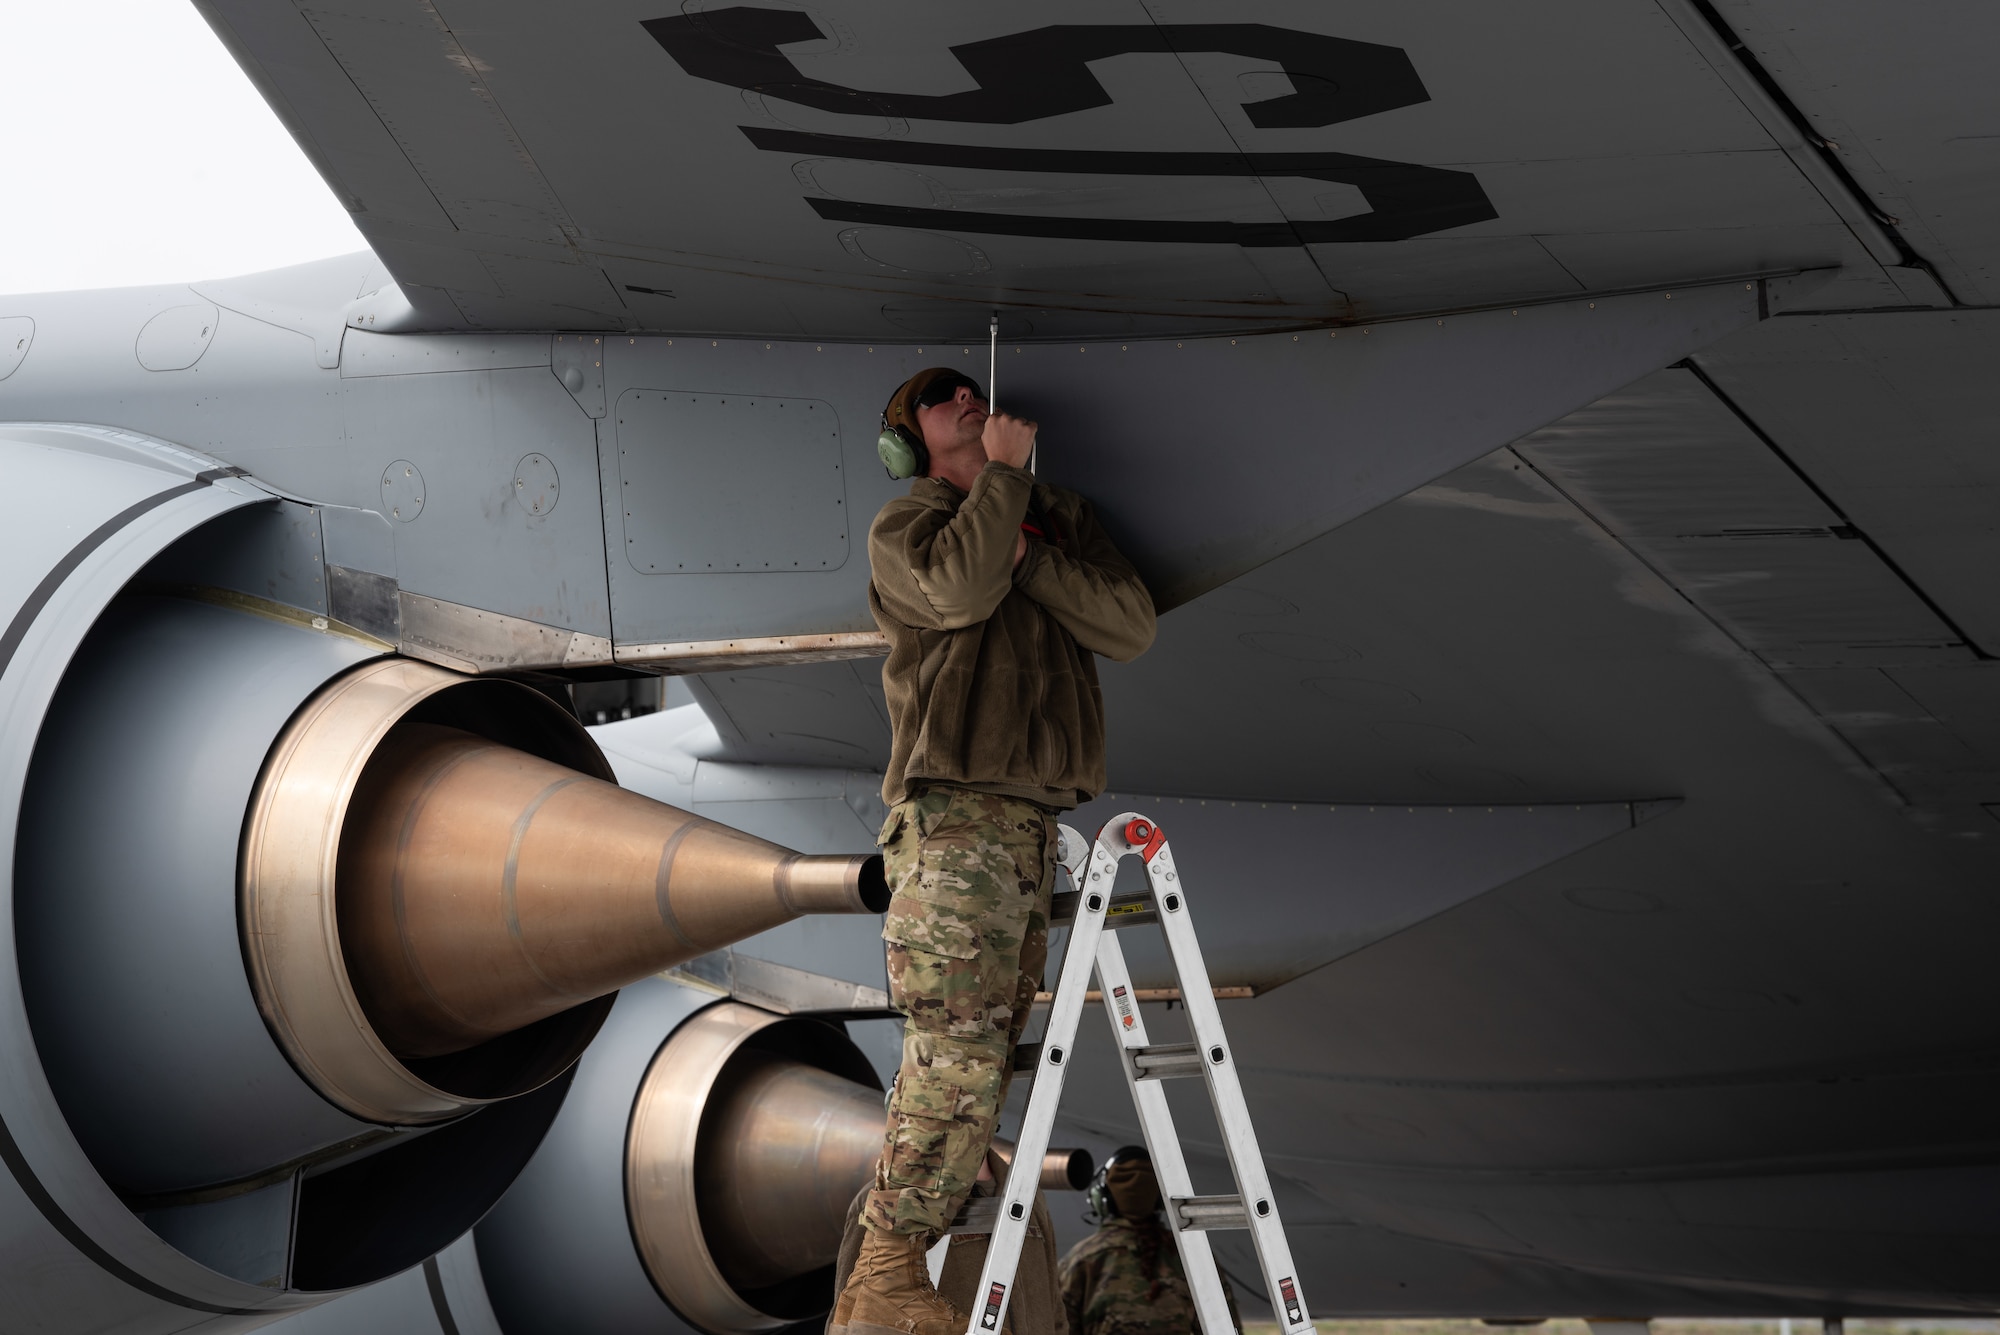 U.S. Air Force Tech. Sgt. Austin Bekkum, a crew chief assigned to the 128th Aircraft Maintenance Squadron, 128th Air Refueling Wing, Wisconsin National Guard, performs maintenance on a KC-135 Stratotanker wing as part of pre-flight procedures during exercise Air Defender 2023 at Keflavik Air Base, Iceland, June 2, 2023. Air Defender 2023, running June 12-23, is the largest air forces redeployment exercise since NATO was founded, integrating both U.S. and allied airpower to defend shared values, while leveraging and strengthening vital partnerships to deter aggression around the world. (U.S. Air National Guard photo by Master Sgt. Kellen Kroening)